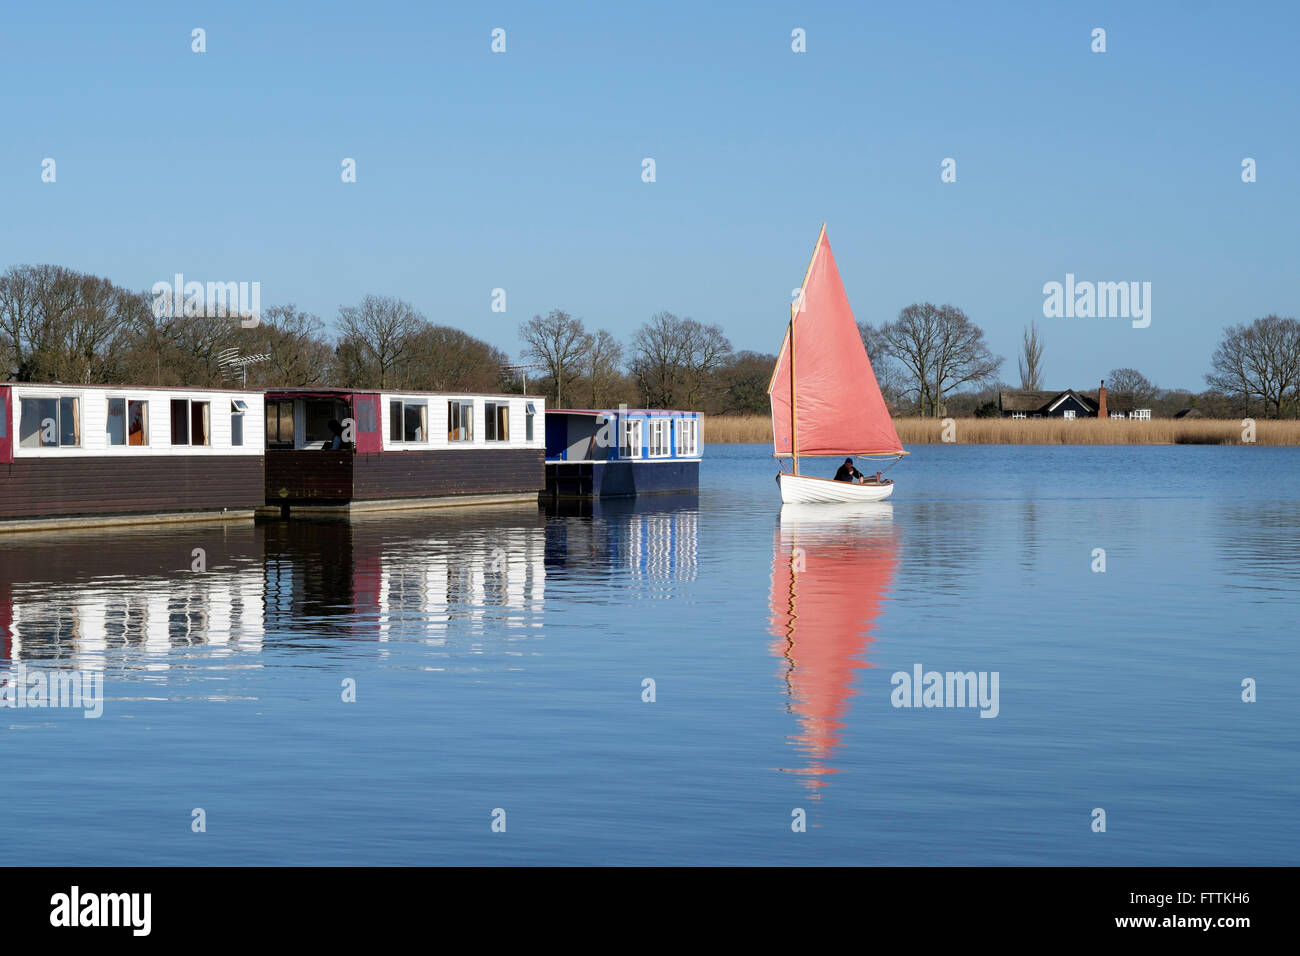 A traditional clinker hulled sailing dinghy sails past a row of houseboats on Hickling Broad, Norfolk, England, UK Stock Photo